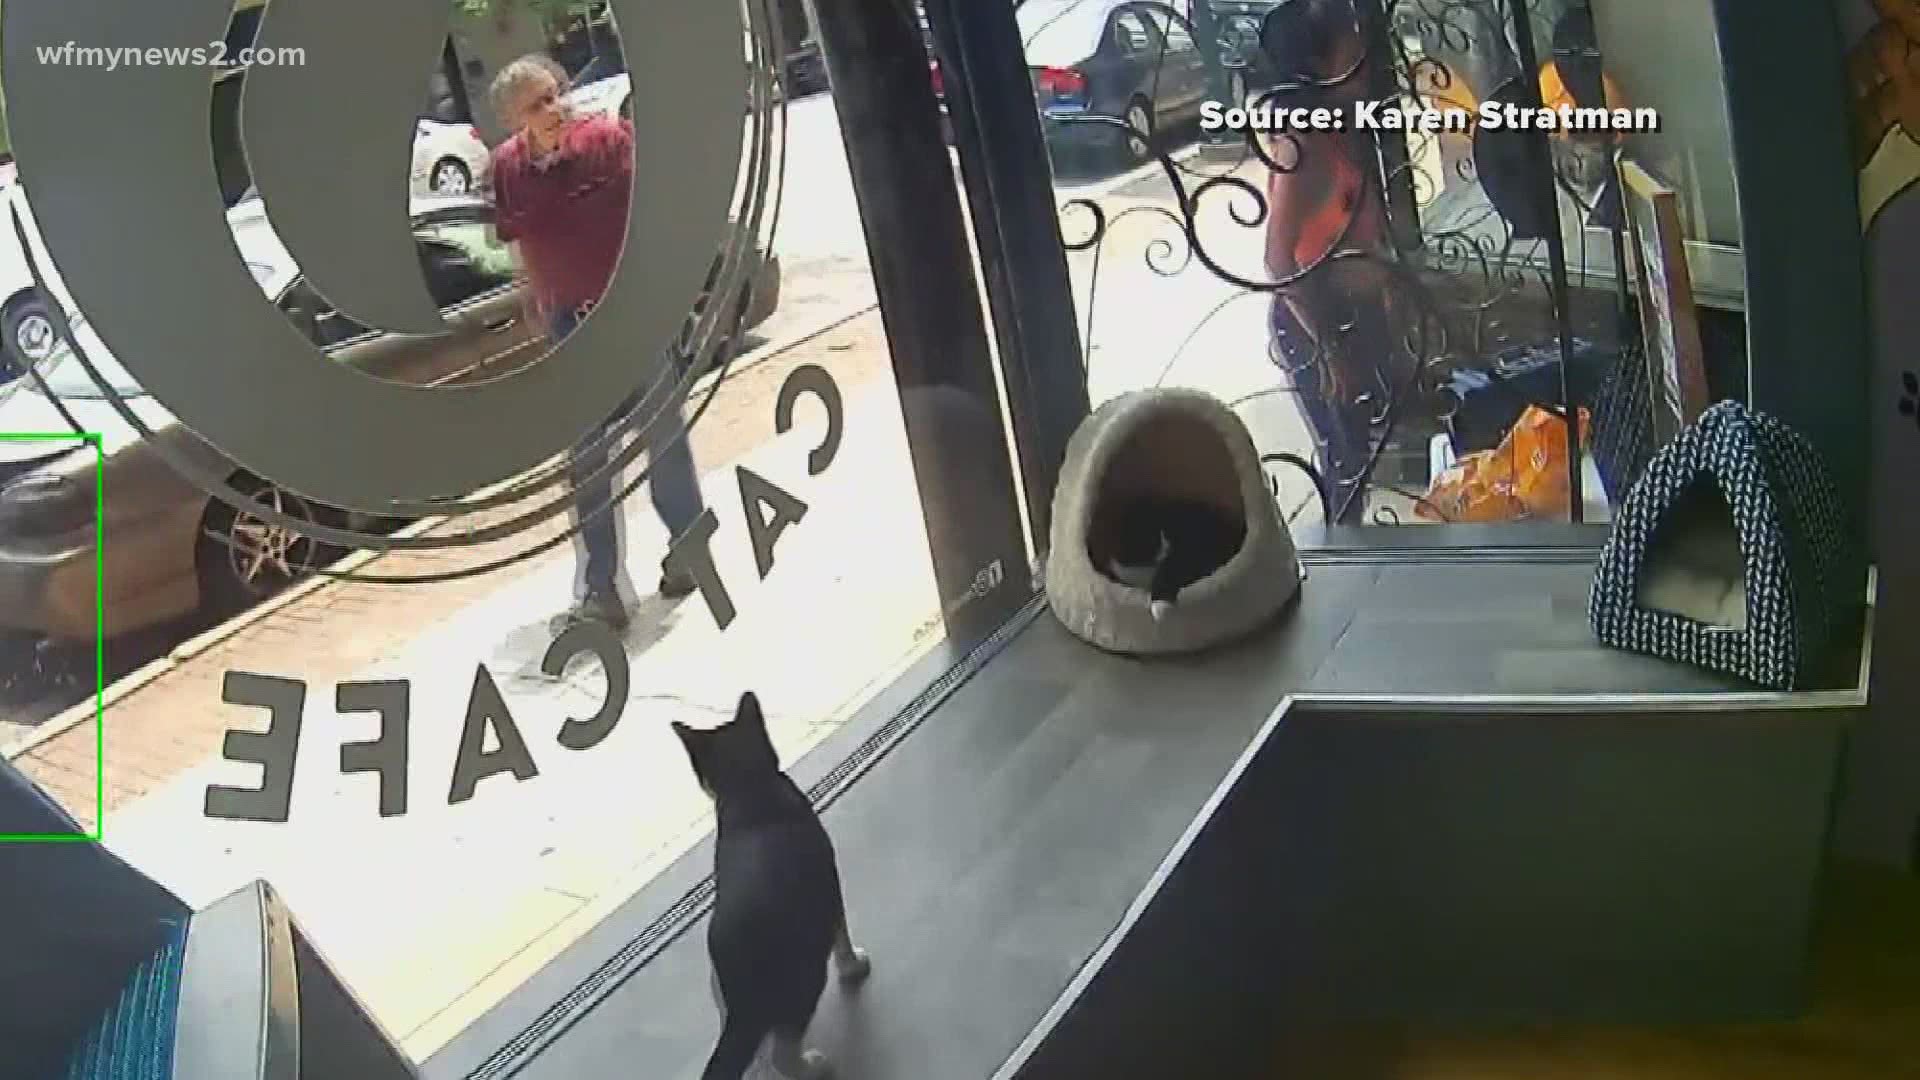 A woman was caught on camera dropping off crates of cats and kittens at the Crooked Tail Cat Café in downtown Greensboro.